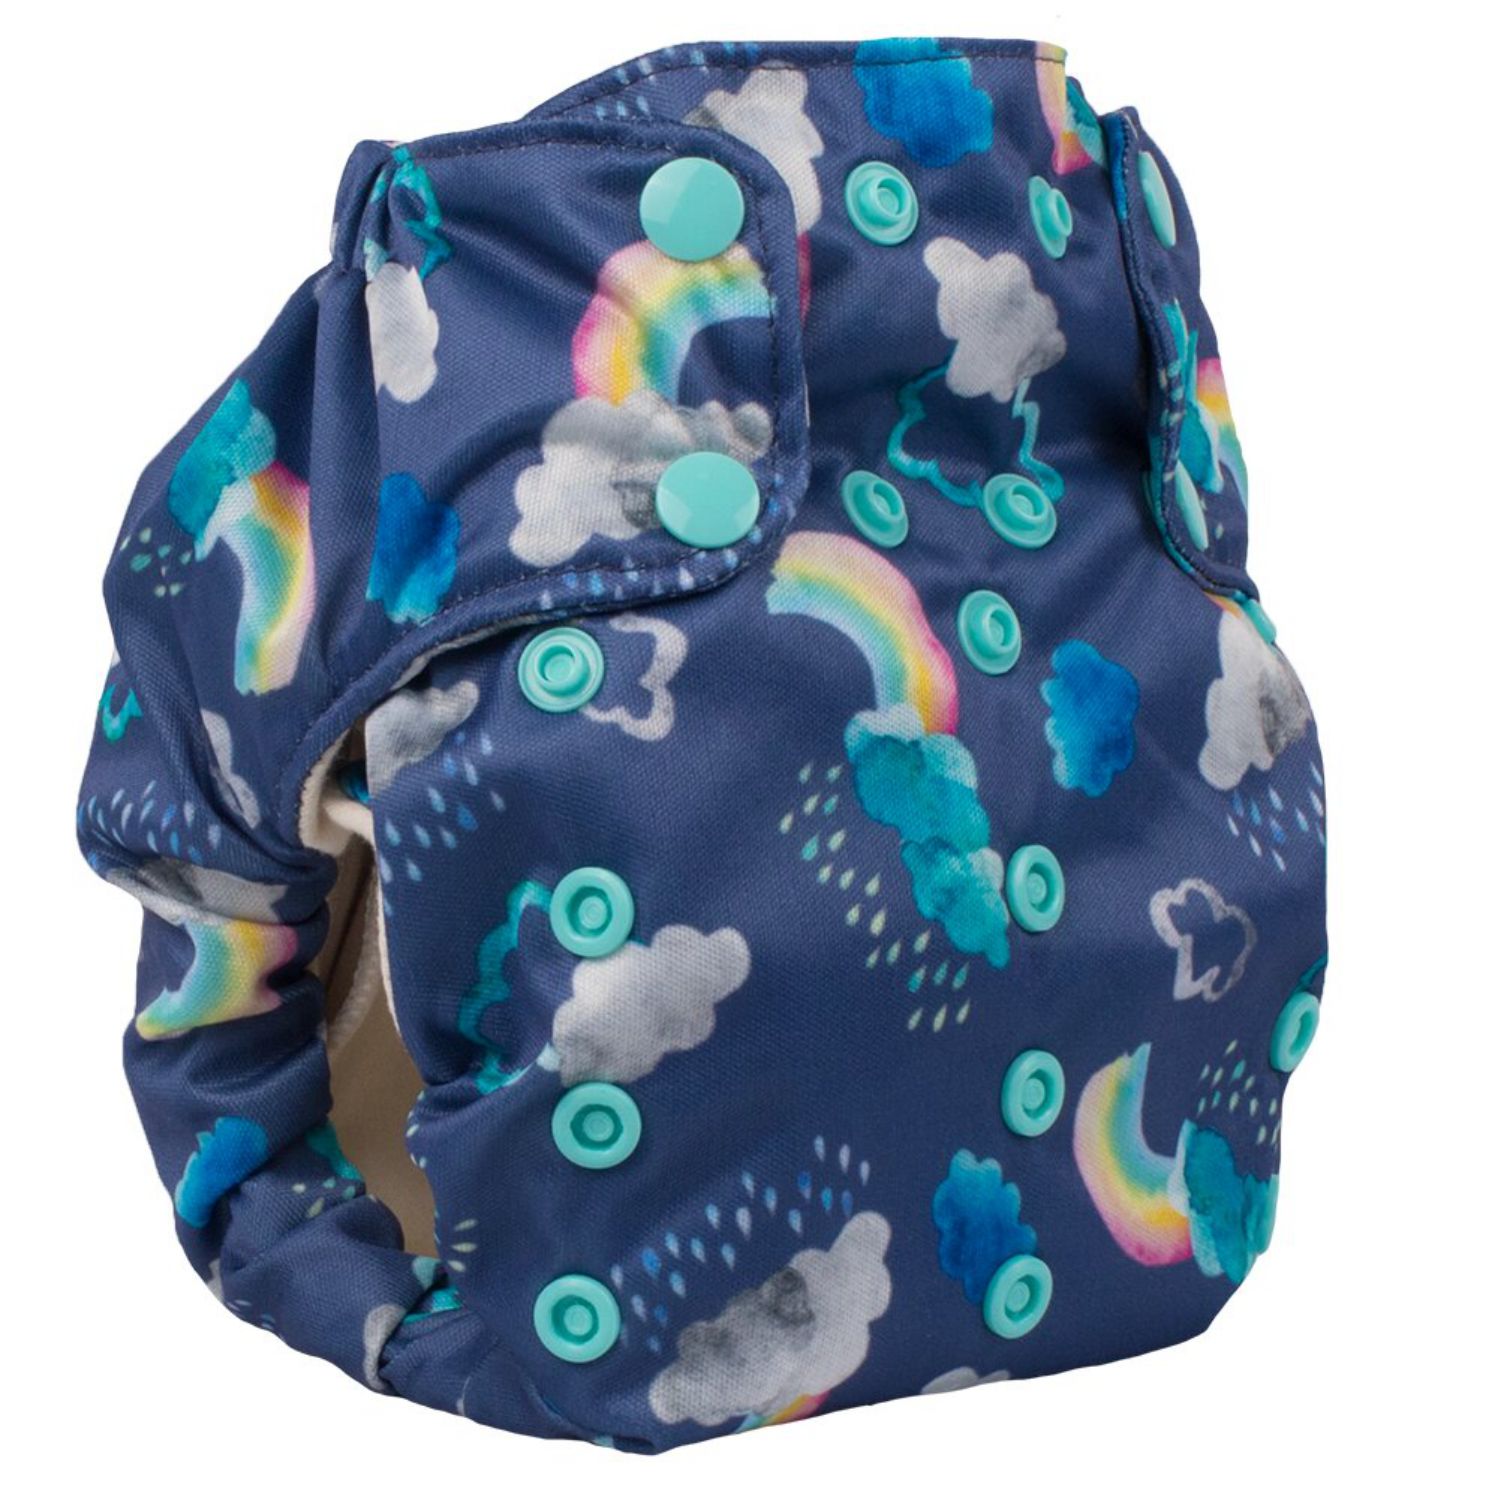 Smart Bottoms 3.1 One Size All-in-One nappy Pattern: Over the Rainbow